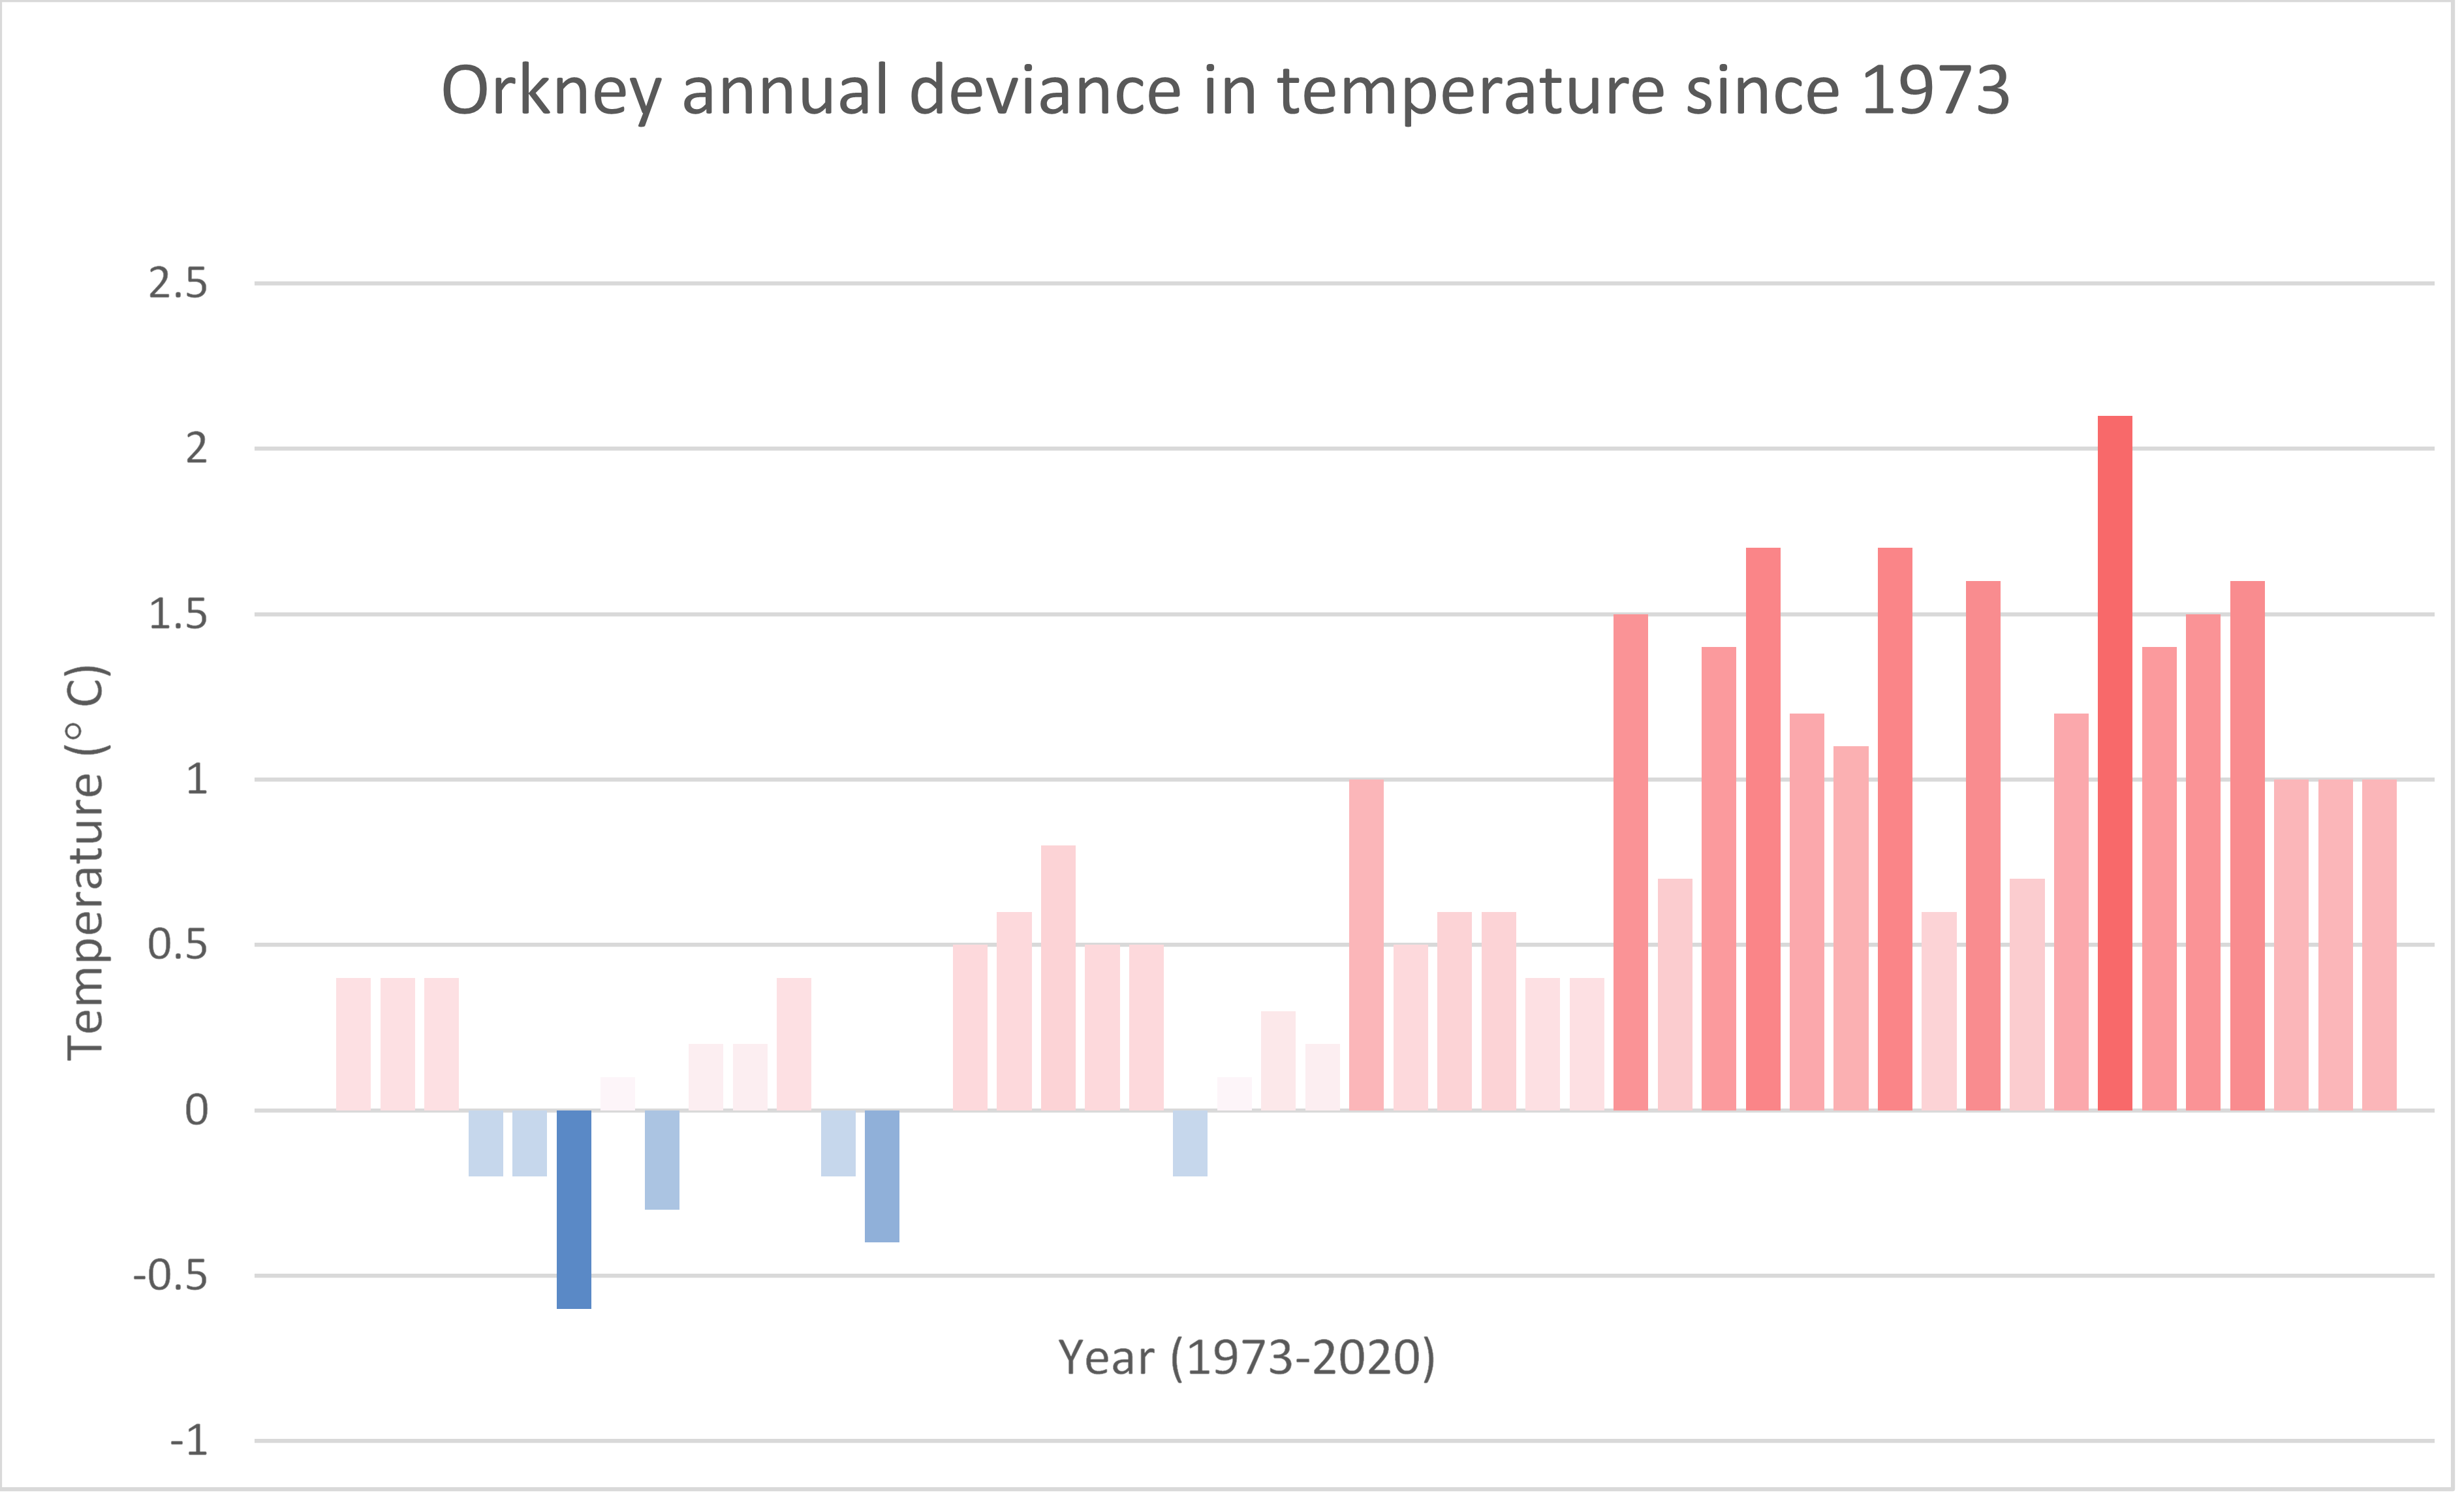 Orkney annual deviance in temperature since 1973